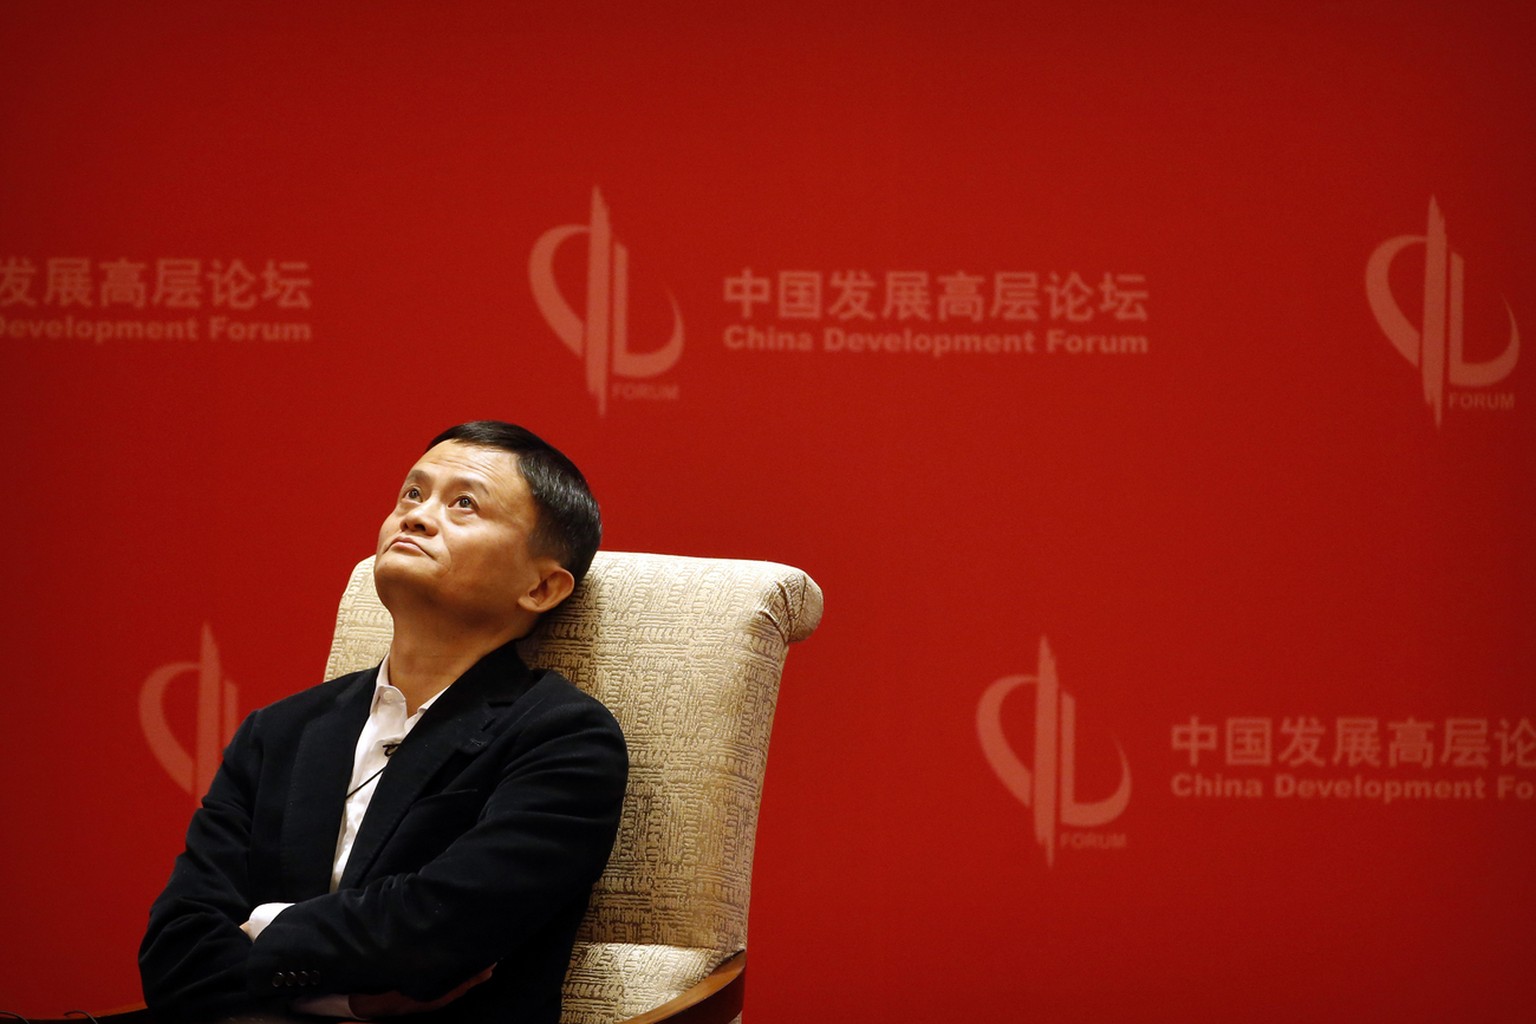 Jack Ma, executive chairman of the Alibaba Group, looks up during a panel discussion held as part of the China Development Forum at the Diaoyutai State Guesthouse in Beijing, Saturday, March 19, 2016. ...